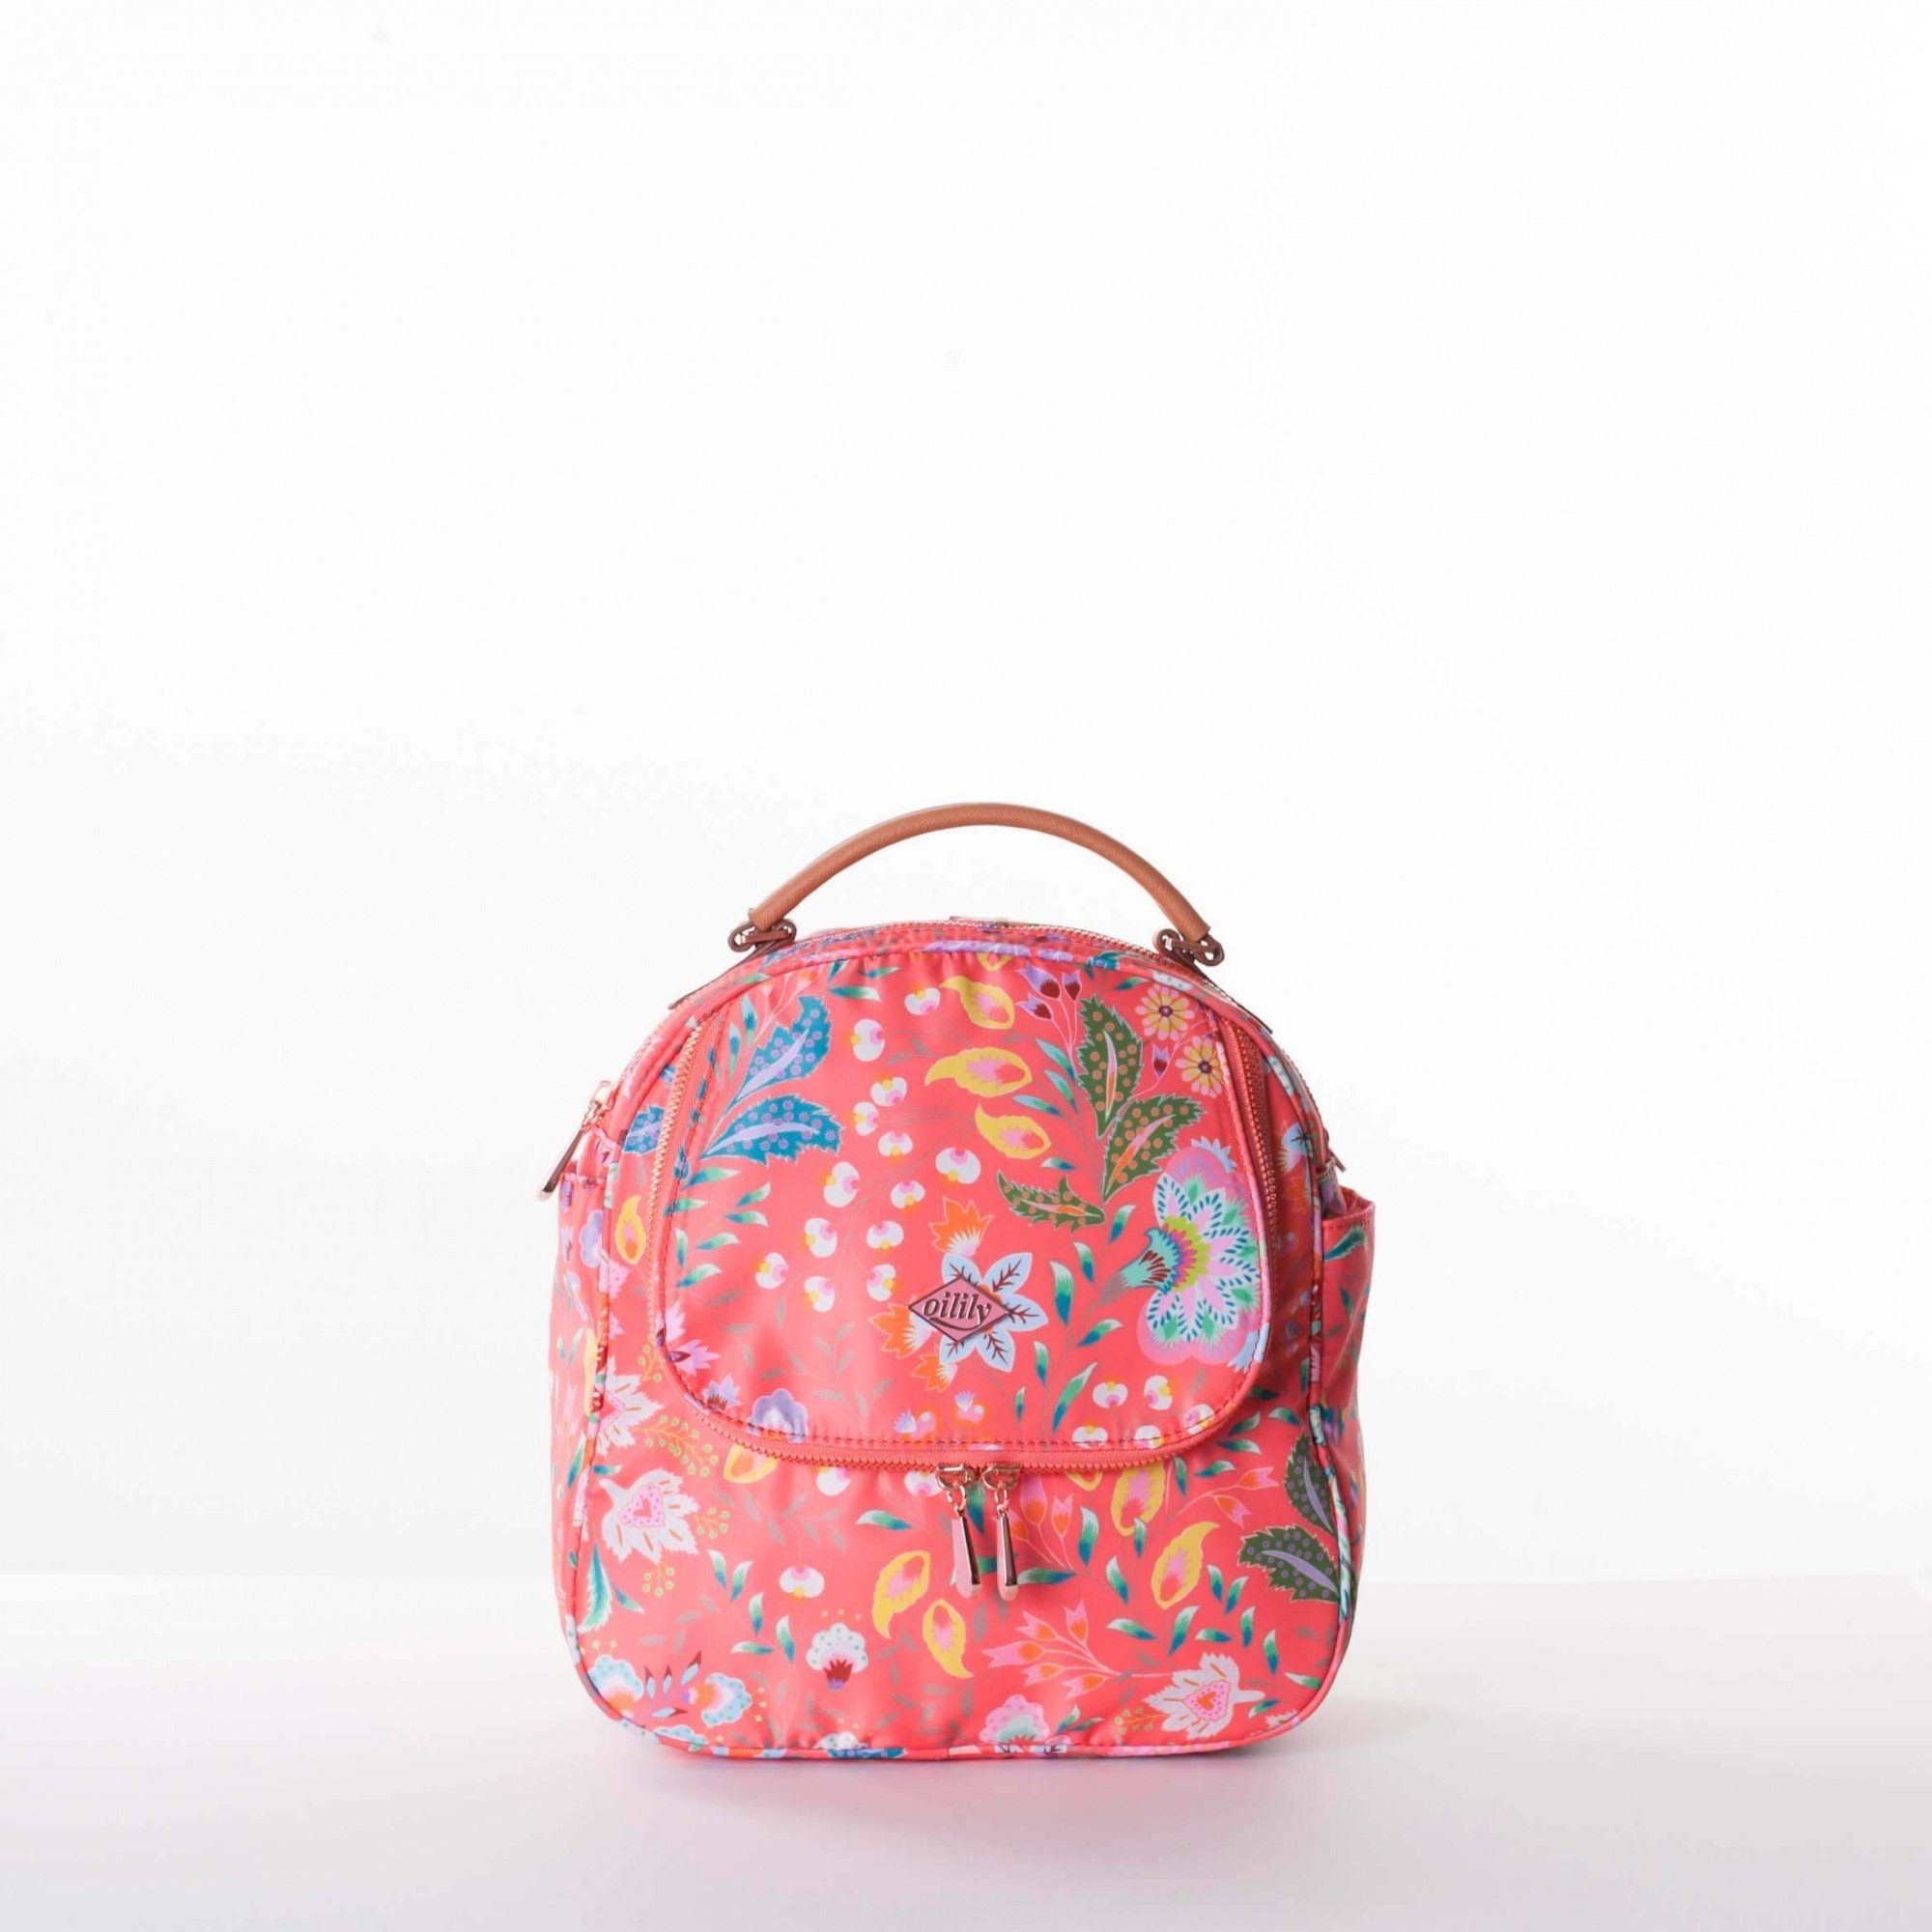 Coral Schultertasche Hot Oilily